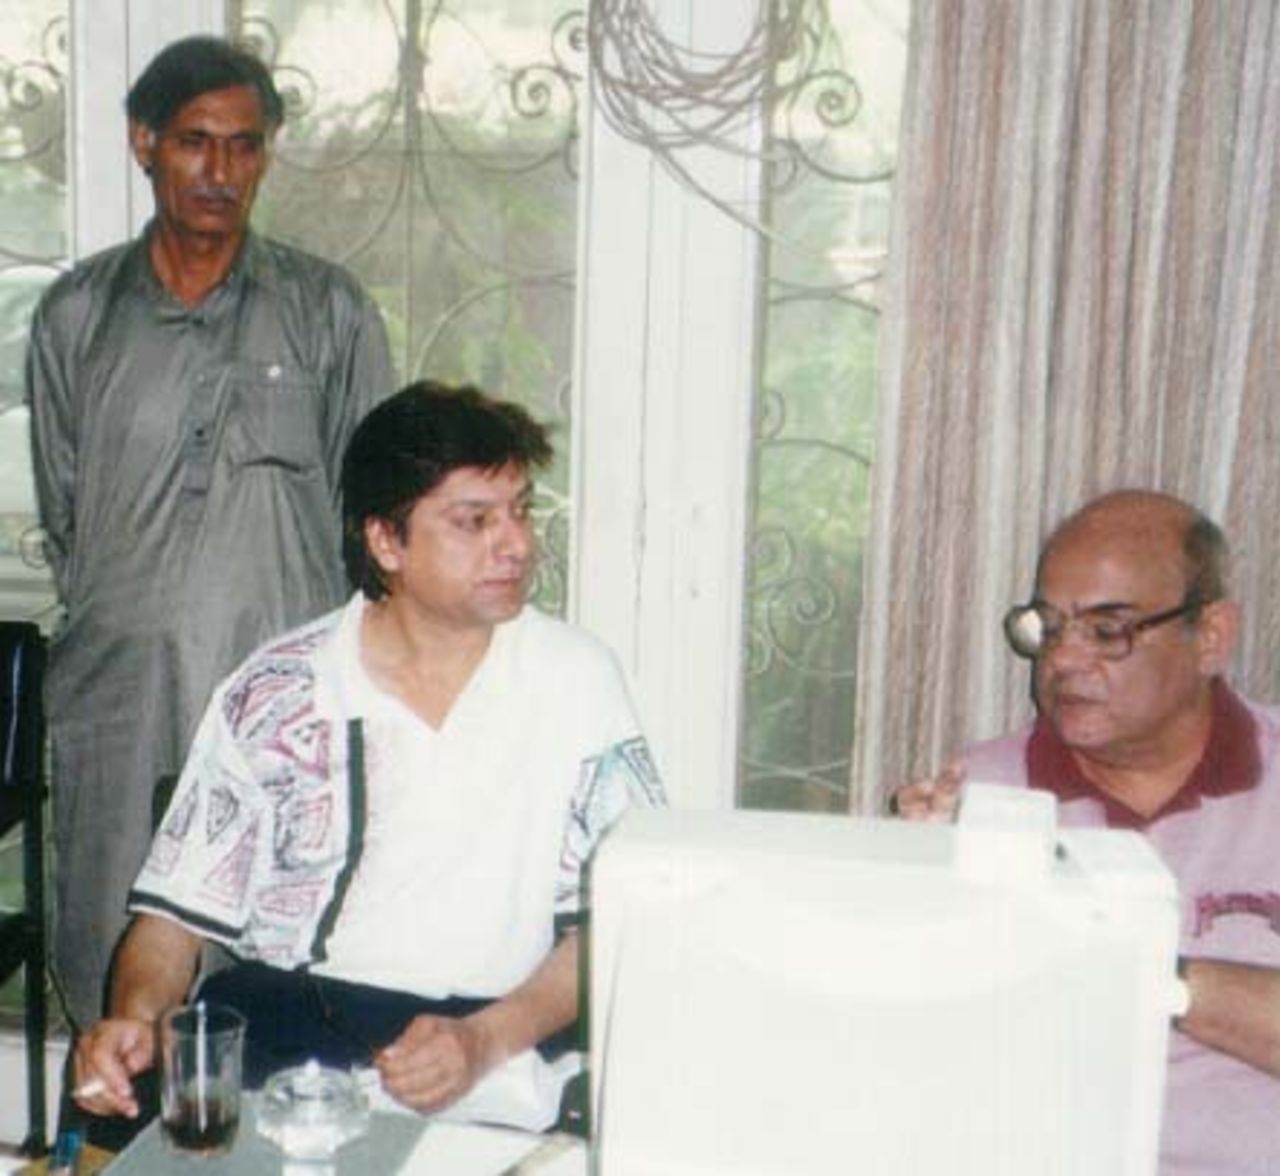 Mohsin Khan at his Interview on 1 June 1998 with Mohammad Din, QDO Admin Officer standing behind him